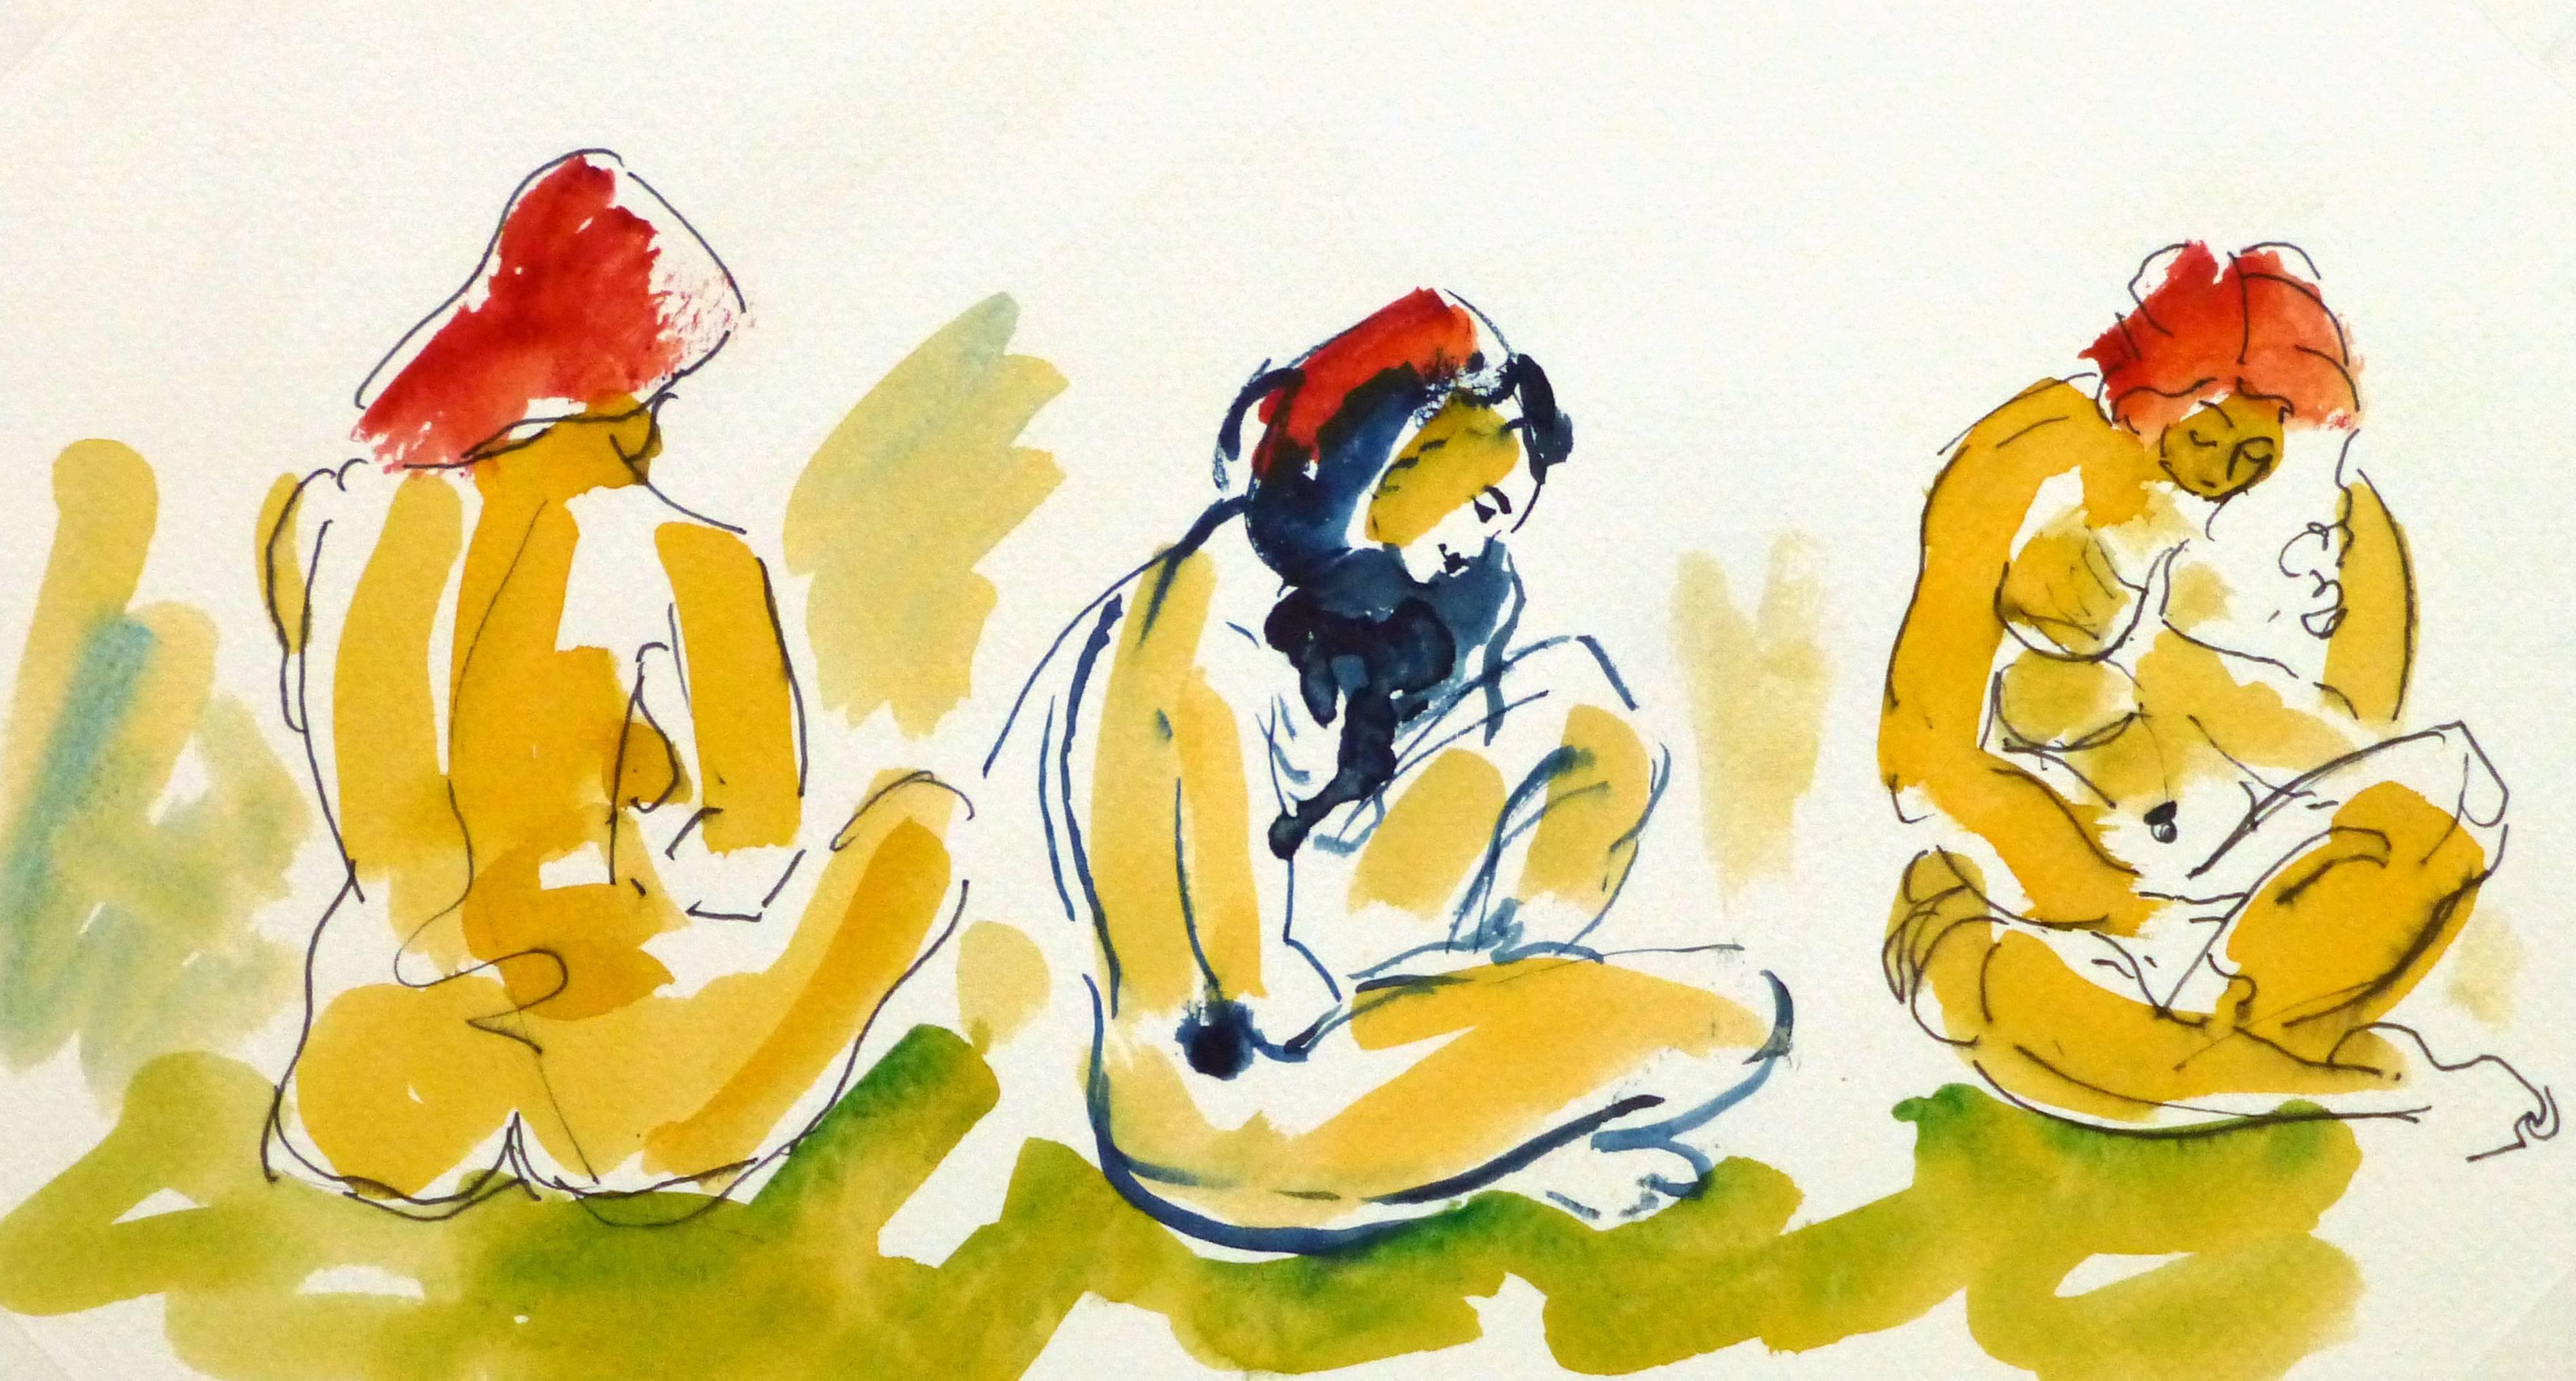 Unknown Nude - Ink & Watercolor - A Study in Sitting